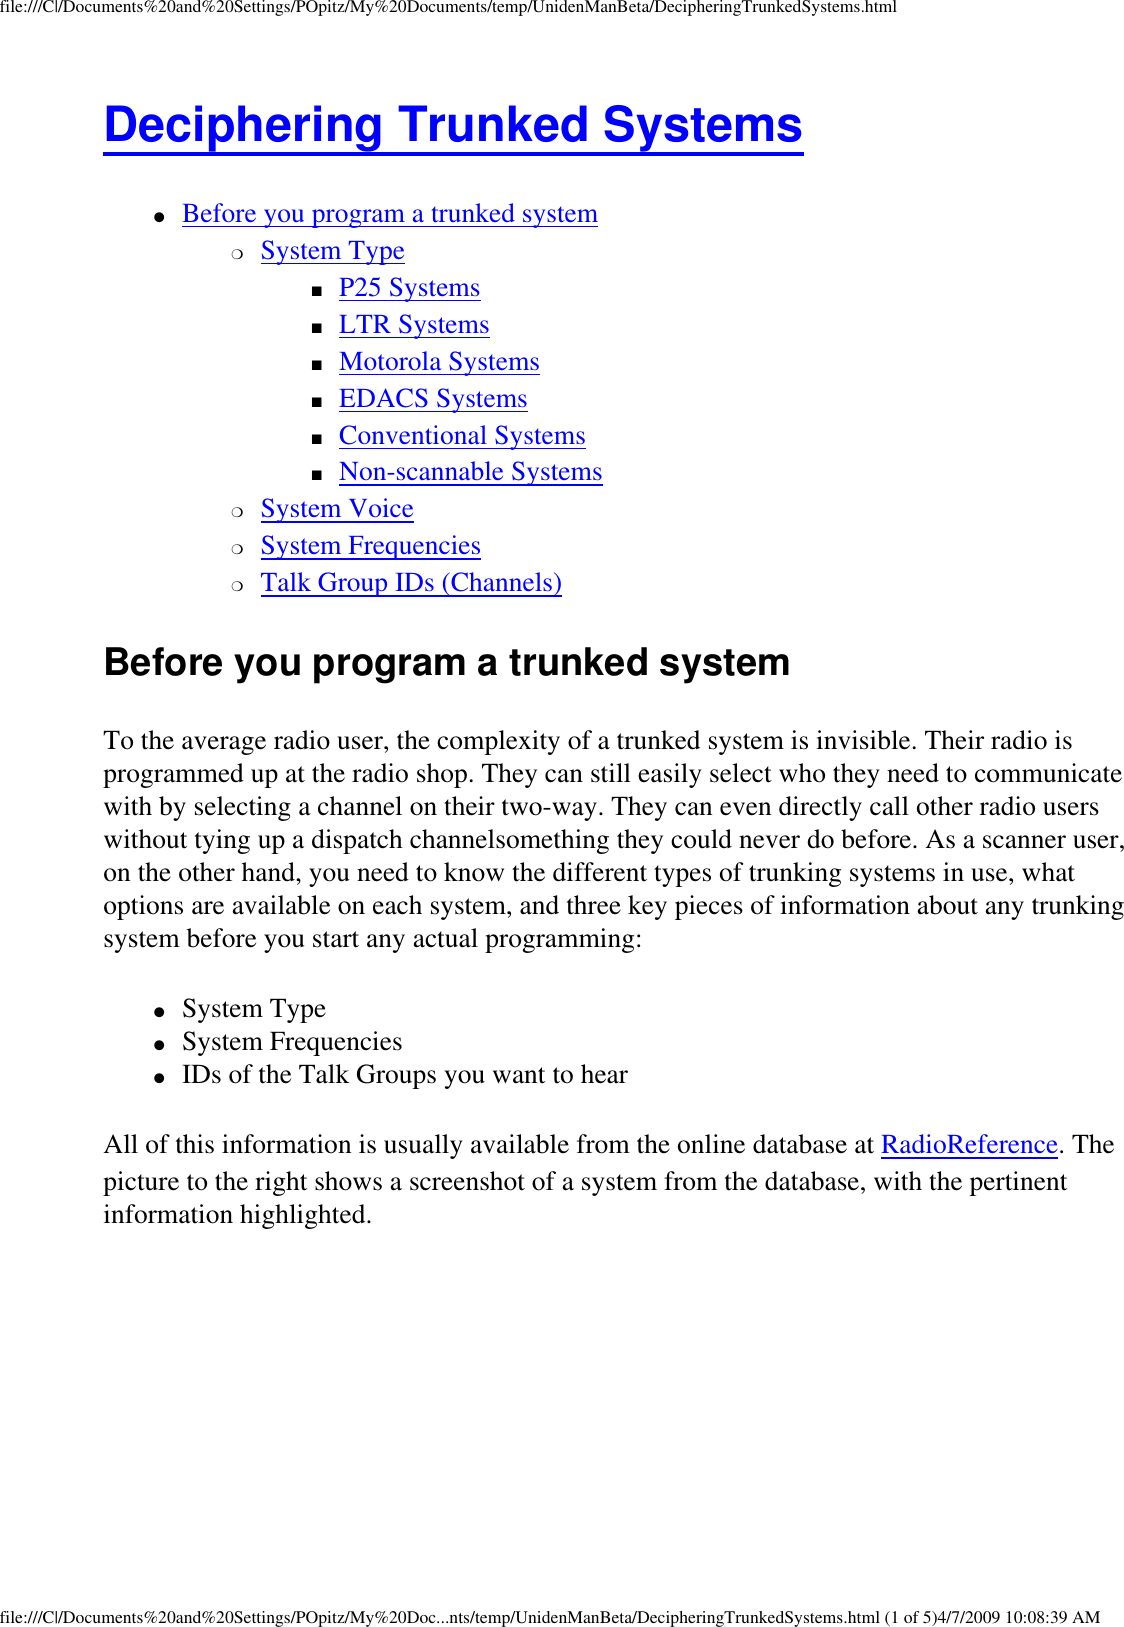 file:///C|/Documents%20and%20Settings/POpitz/My%20Documents/temp/UnidenManBeta/DecipheringTrunkedSystems.htmlDeciphering Trunked Systems ●     Before you program a trunked system ❍     System Type ■     P25 Systems ■     LTR Systems ■     Motorola Systems ■     EDACS Systems ■     Conventional Systems ■     Non-scannable Systems ❍     System Voice ❍     System Frequencies ❍     Talk Group IDs (Channels) Before you program a trunked system To the average radio user, the complexity of a trunked system is invisible. Their radio is programmed up at the radio shop. They can still easily select who they need to communicate with by selecting a channel on their two-way. They can even directly call other radio users without tying up a dispatch channelsomething they could never do before. As a scanner user, on the other hand, you need to know the different types of trunking systems in use, what options are available on each system, and three key pieces of information about any trunking system before you start any actual programming: ●     System Type ●     System Frequencies ●     IDs of the Talk Groups you want to hear All of this information is usually available from the online database at RadioReference. The picture to the right shows a screenshot of a system from the database, with the pertinent information highlighted. file:///C|/Documents%20and%20Settings/POpitz/My%20Doc...nts/temp/UnidenManBeta/DecipheringTrunkedSystems.html (1 of 5)4/7/2009 10:08:39 AM